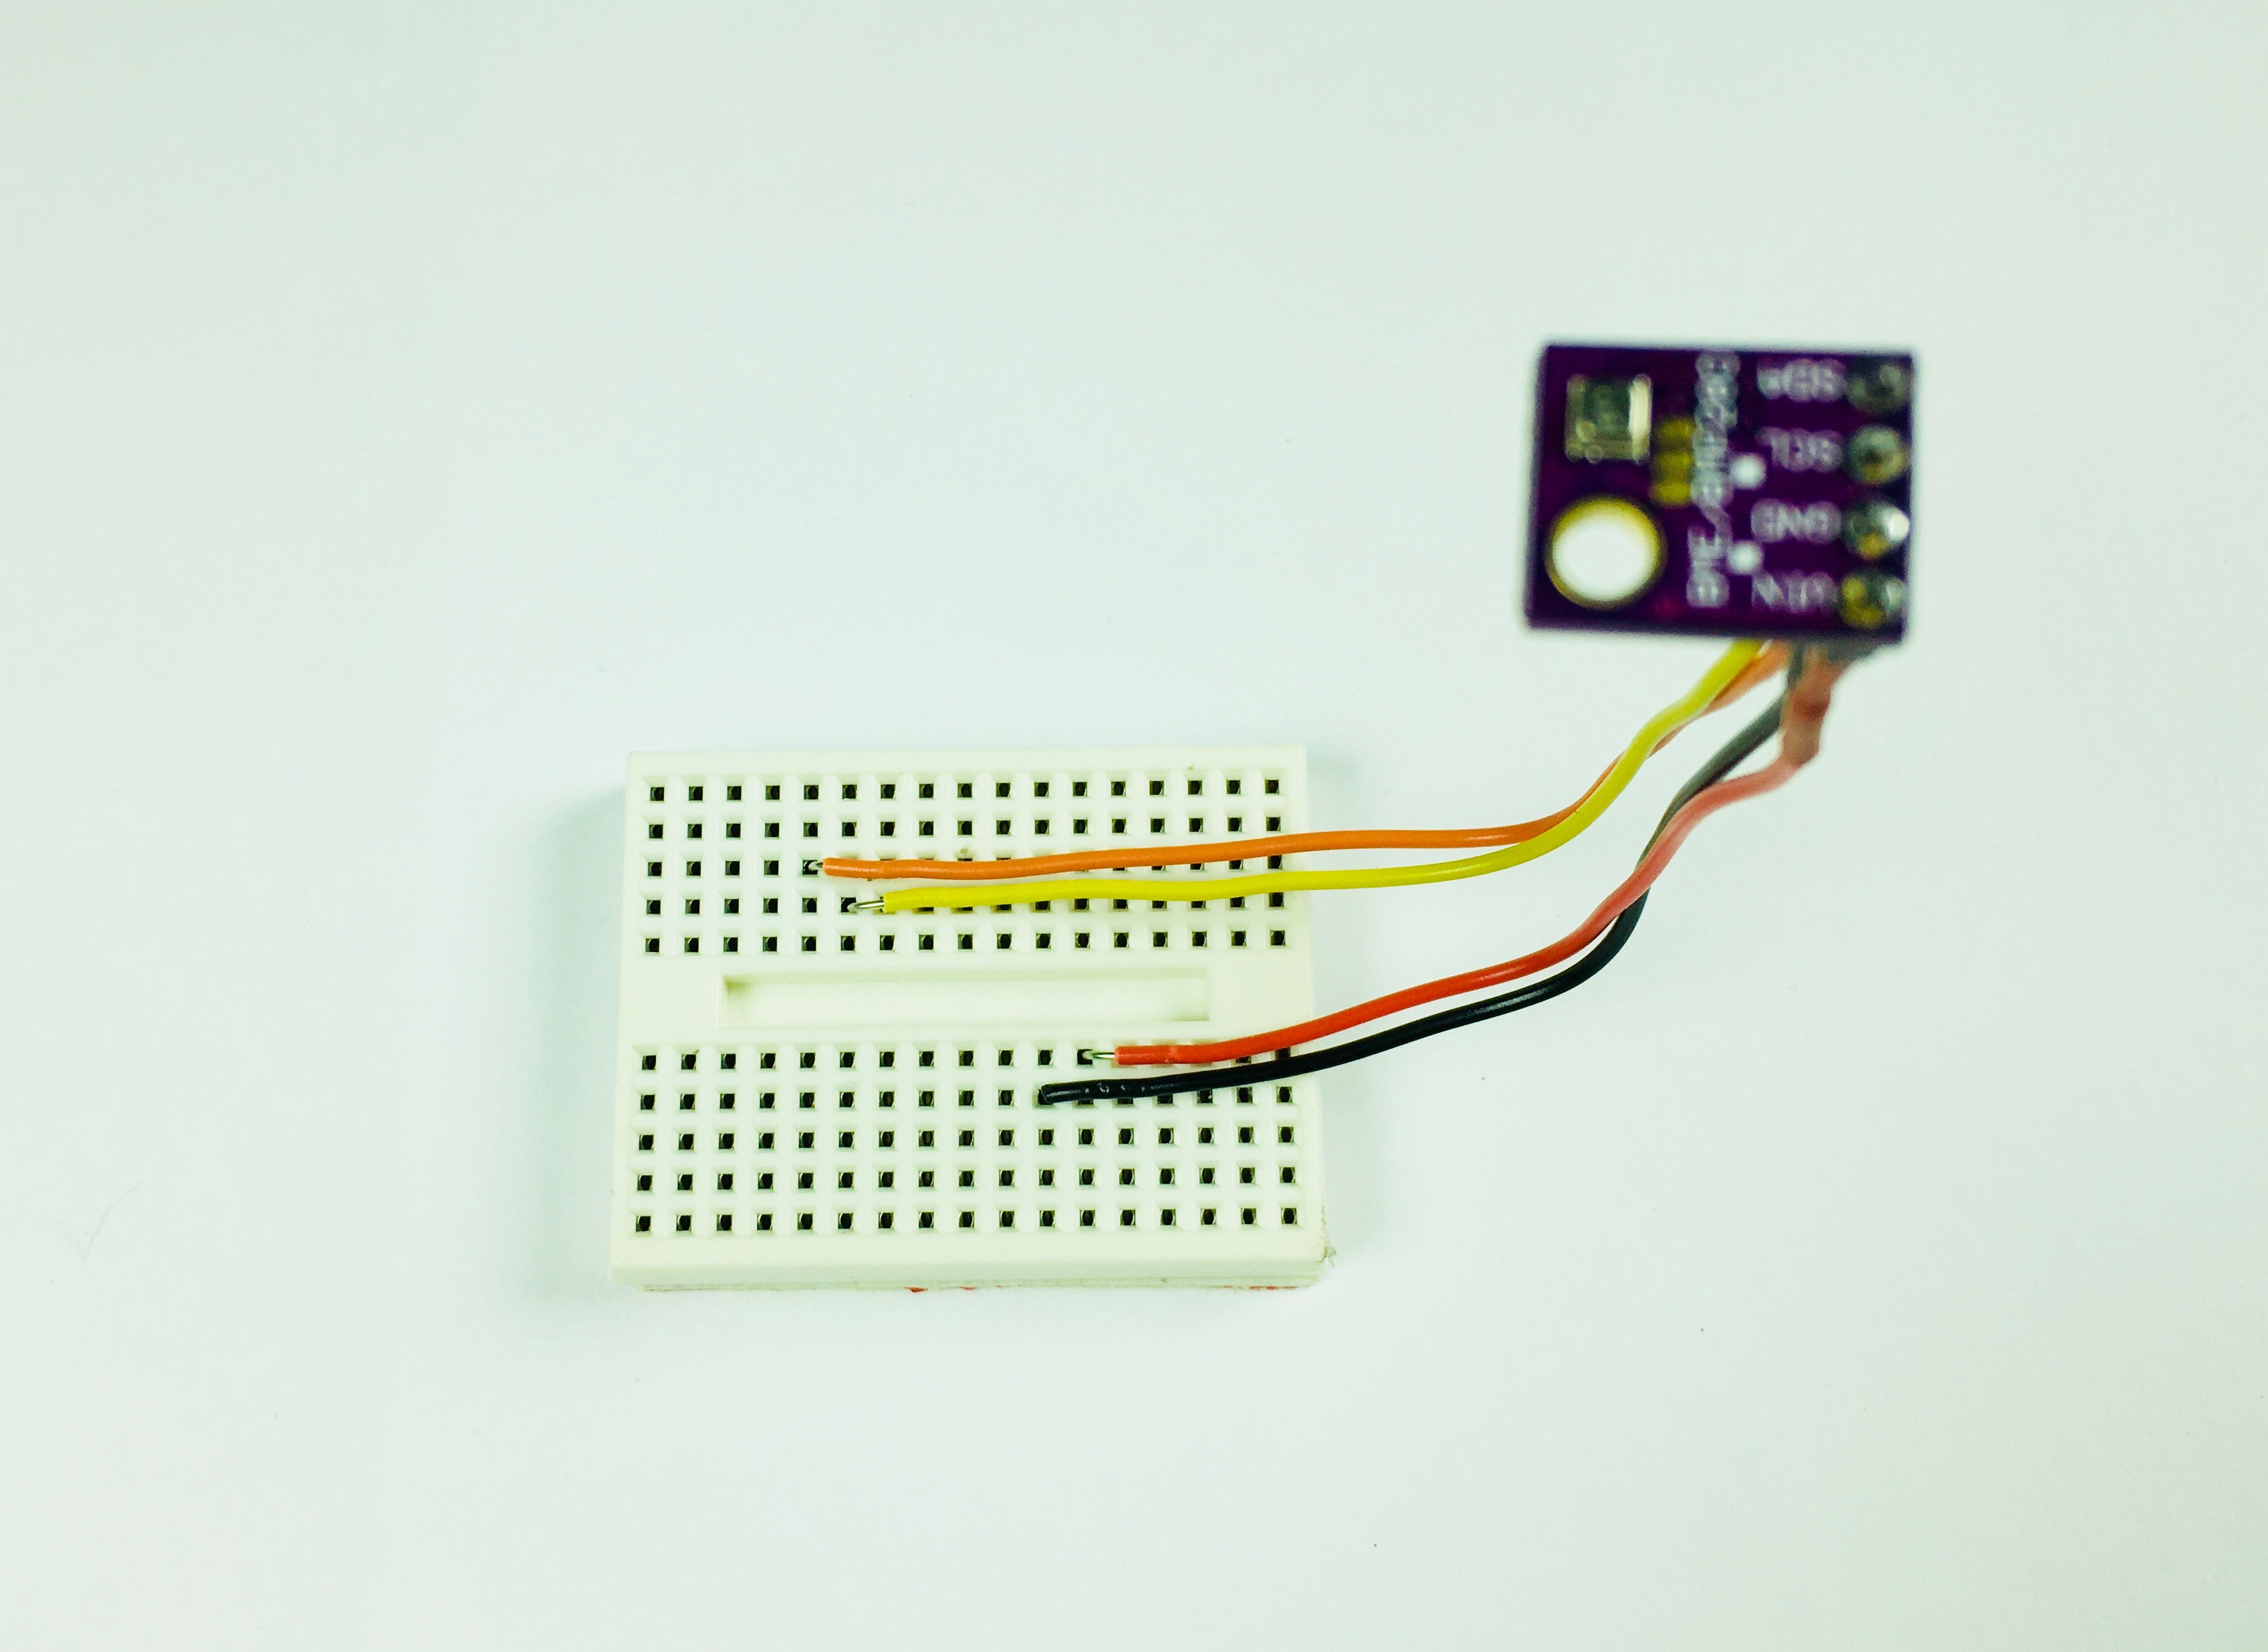 BME280 sensor connected to breadboard.